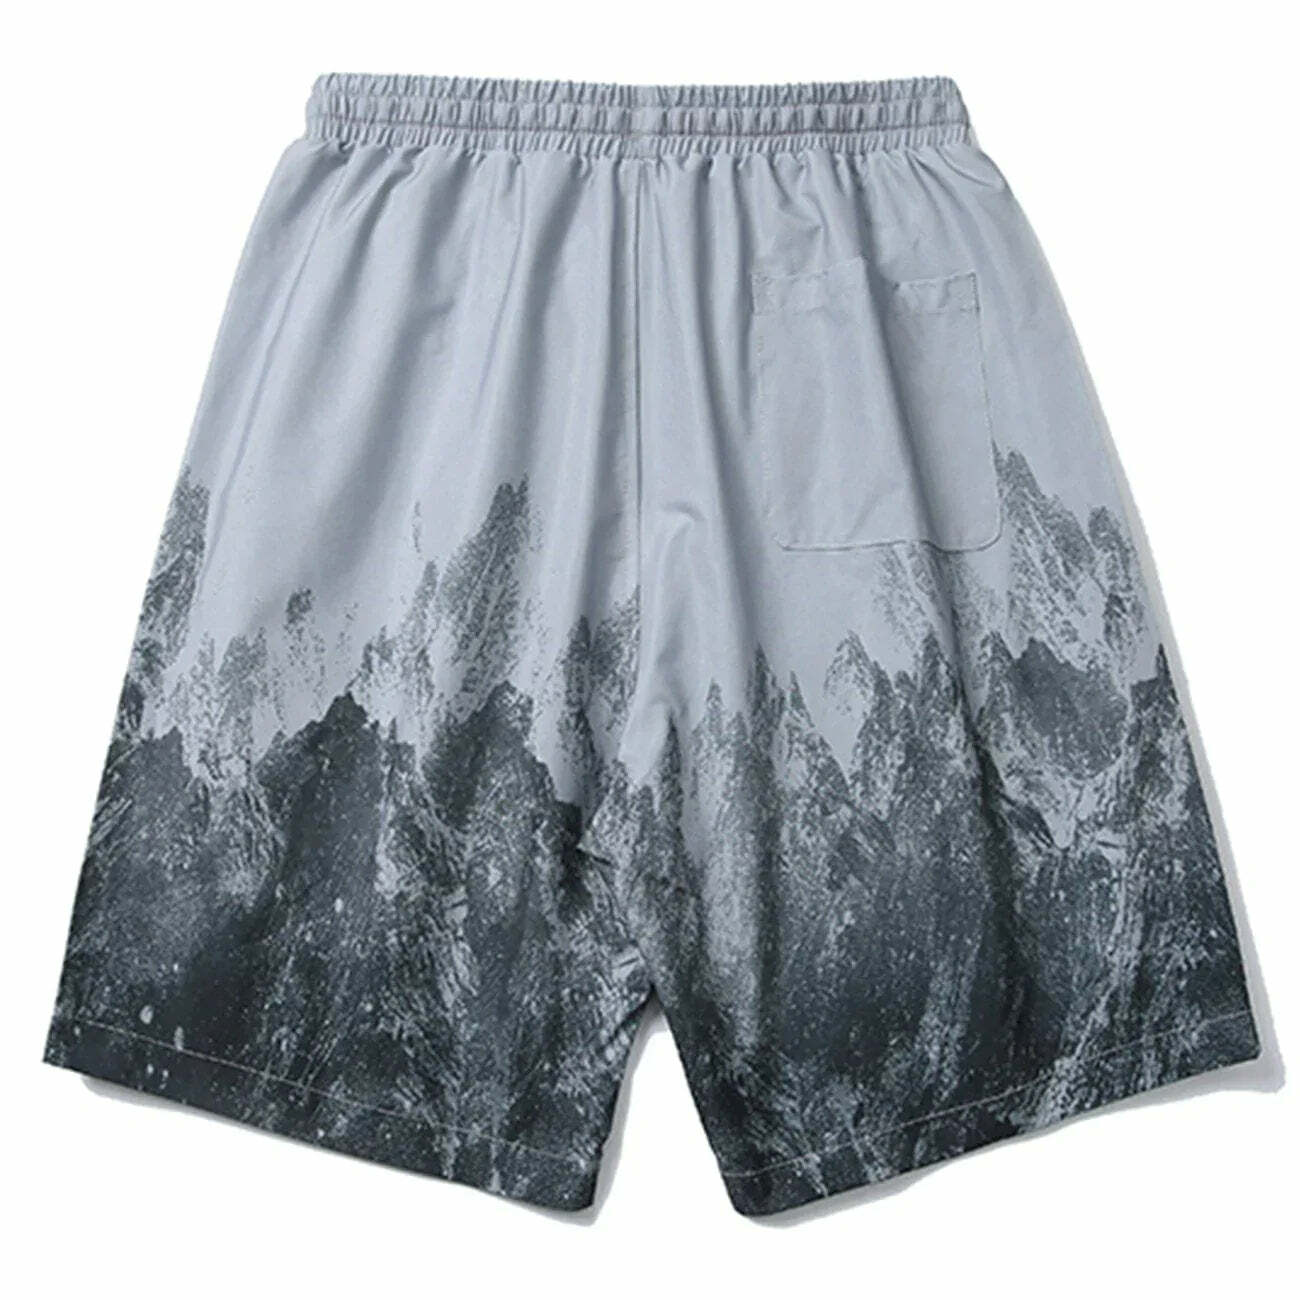 artistic landscape shorts with drawstring youthful & chic 3031